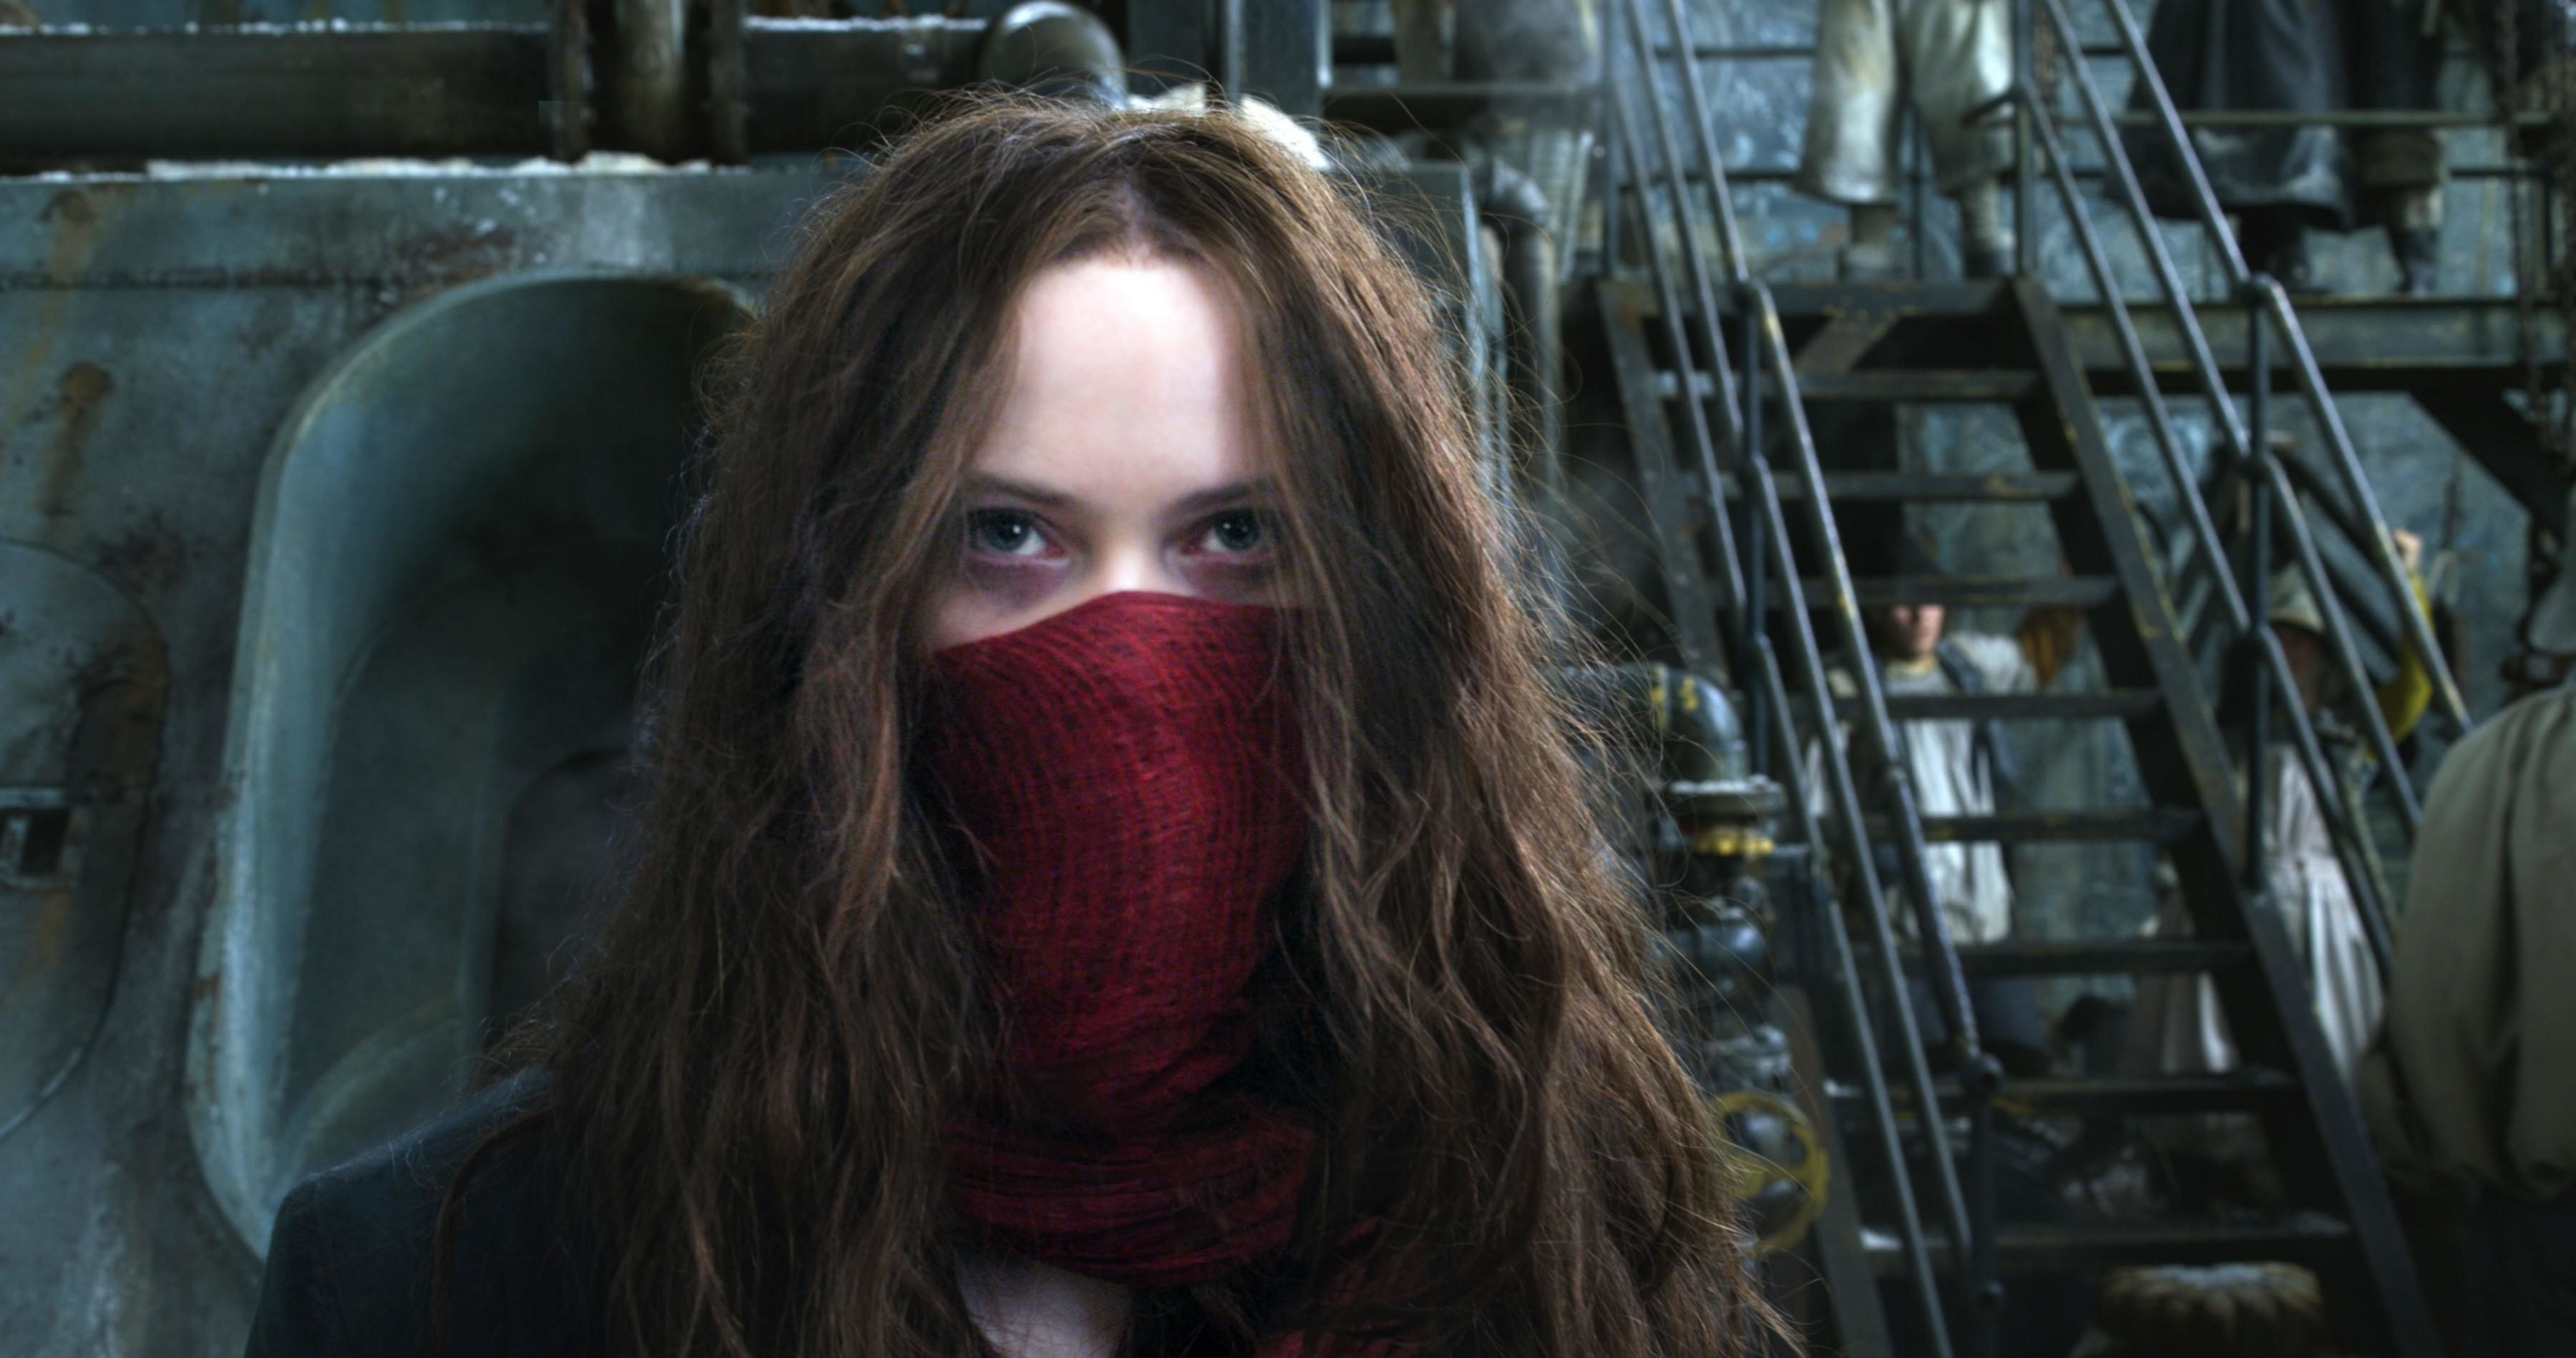 A woman in a red mask stares angrily near an industrial staircase